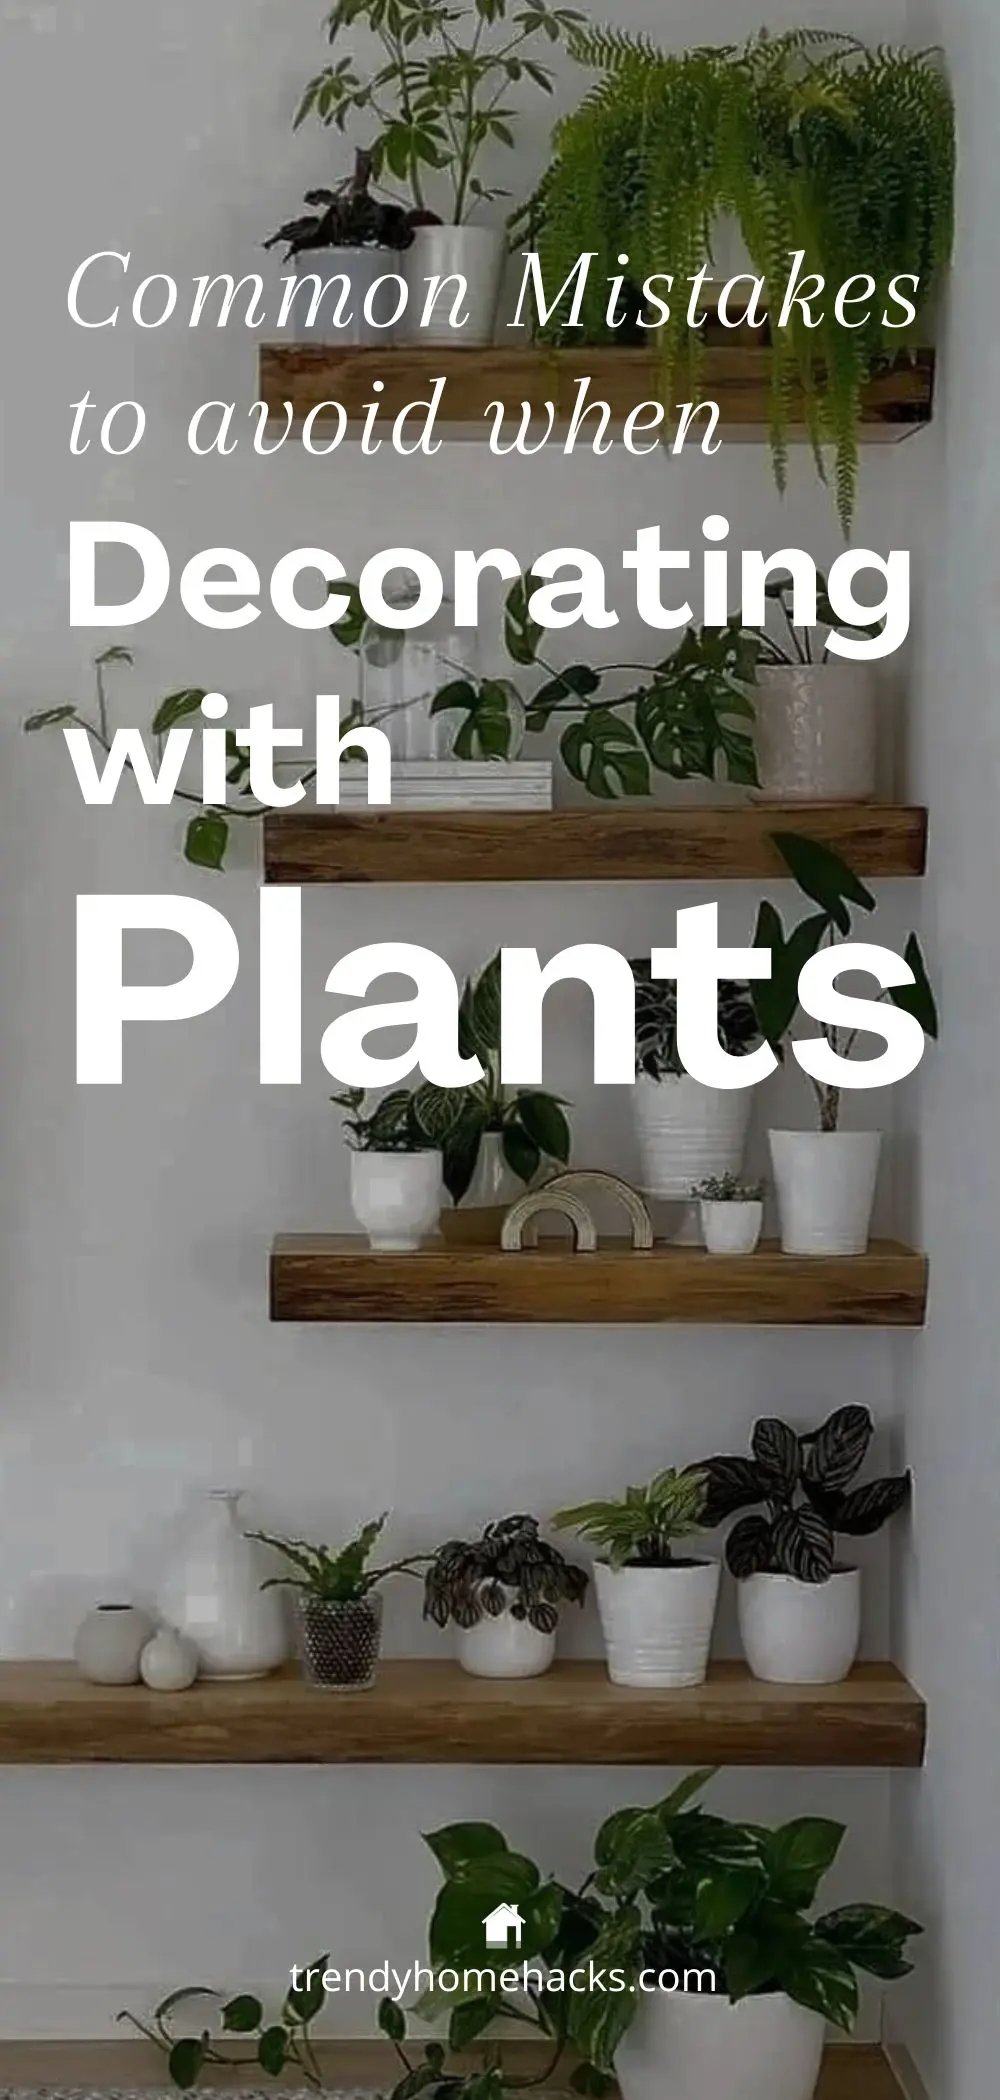 a tall Pinterest pin with a dark background image of floating shelves holding potted plants with a text overlay "Common mistakes to avoid when decorating with plants."